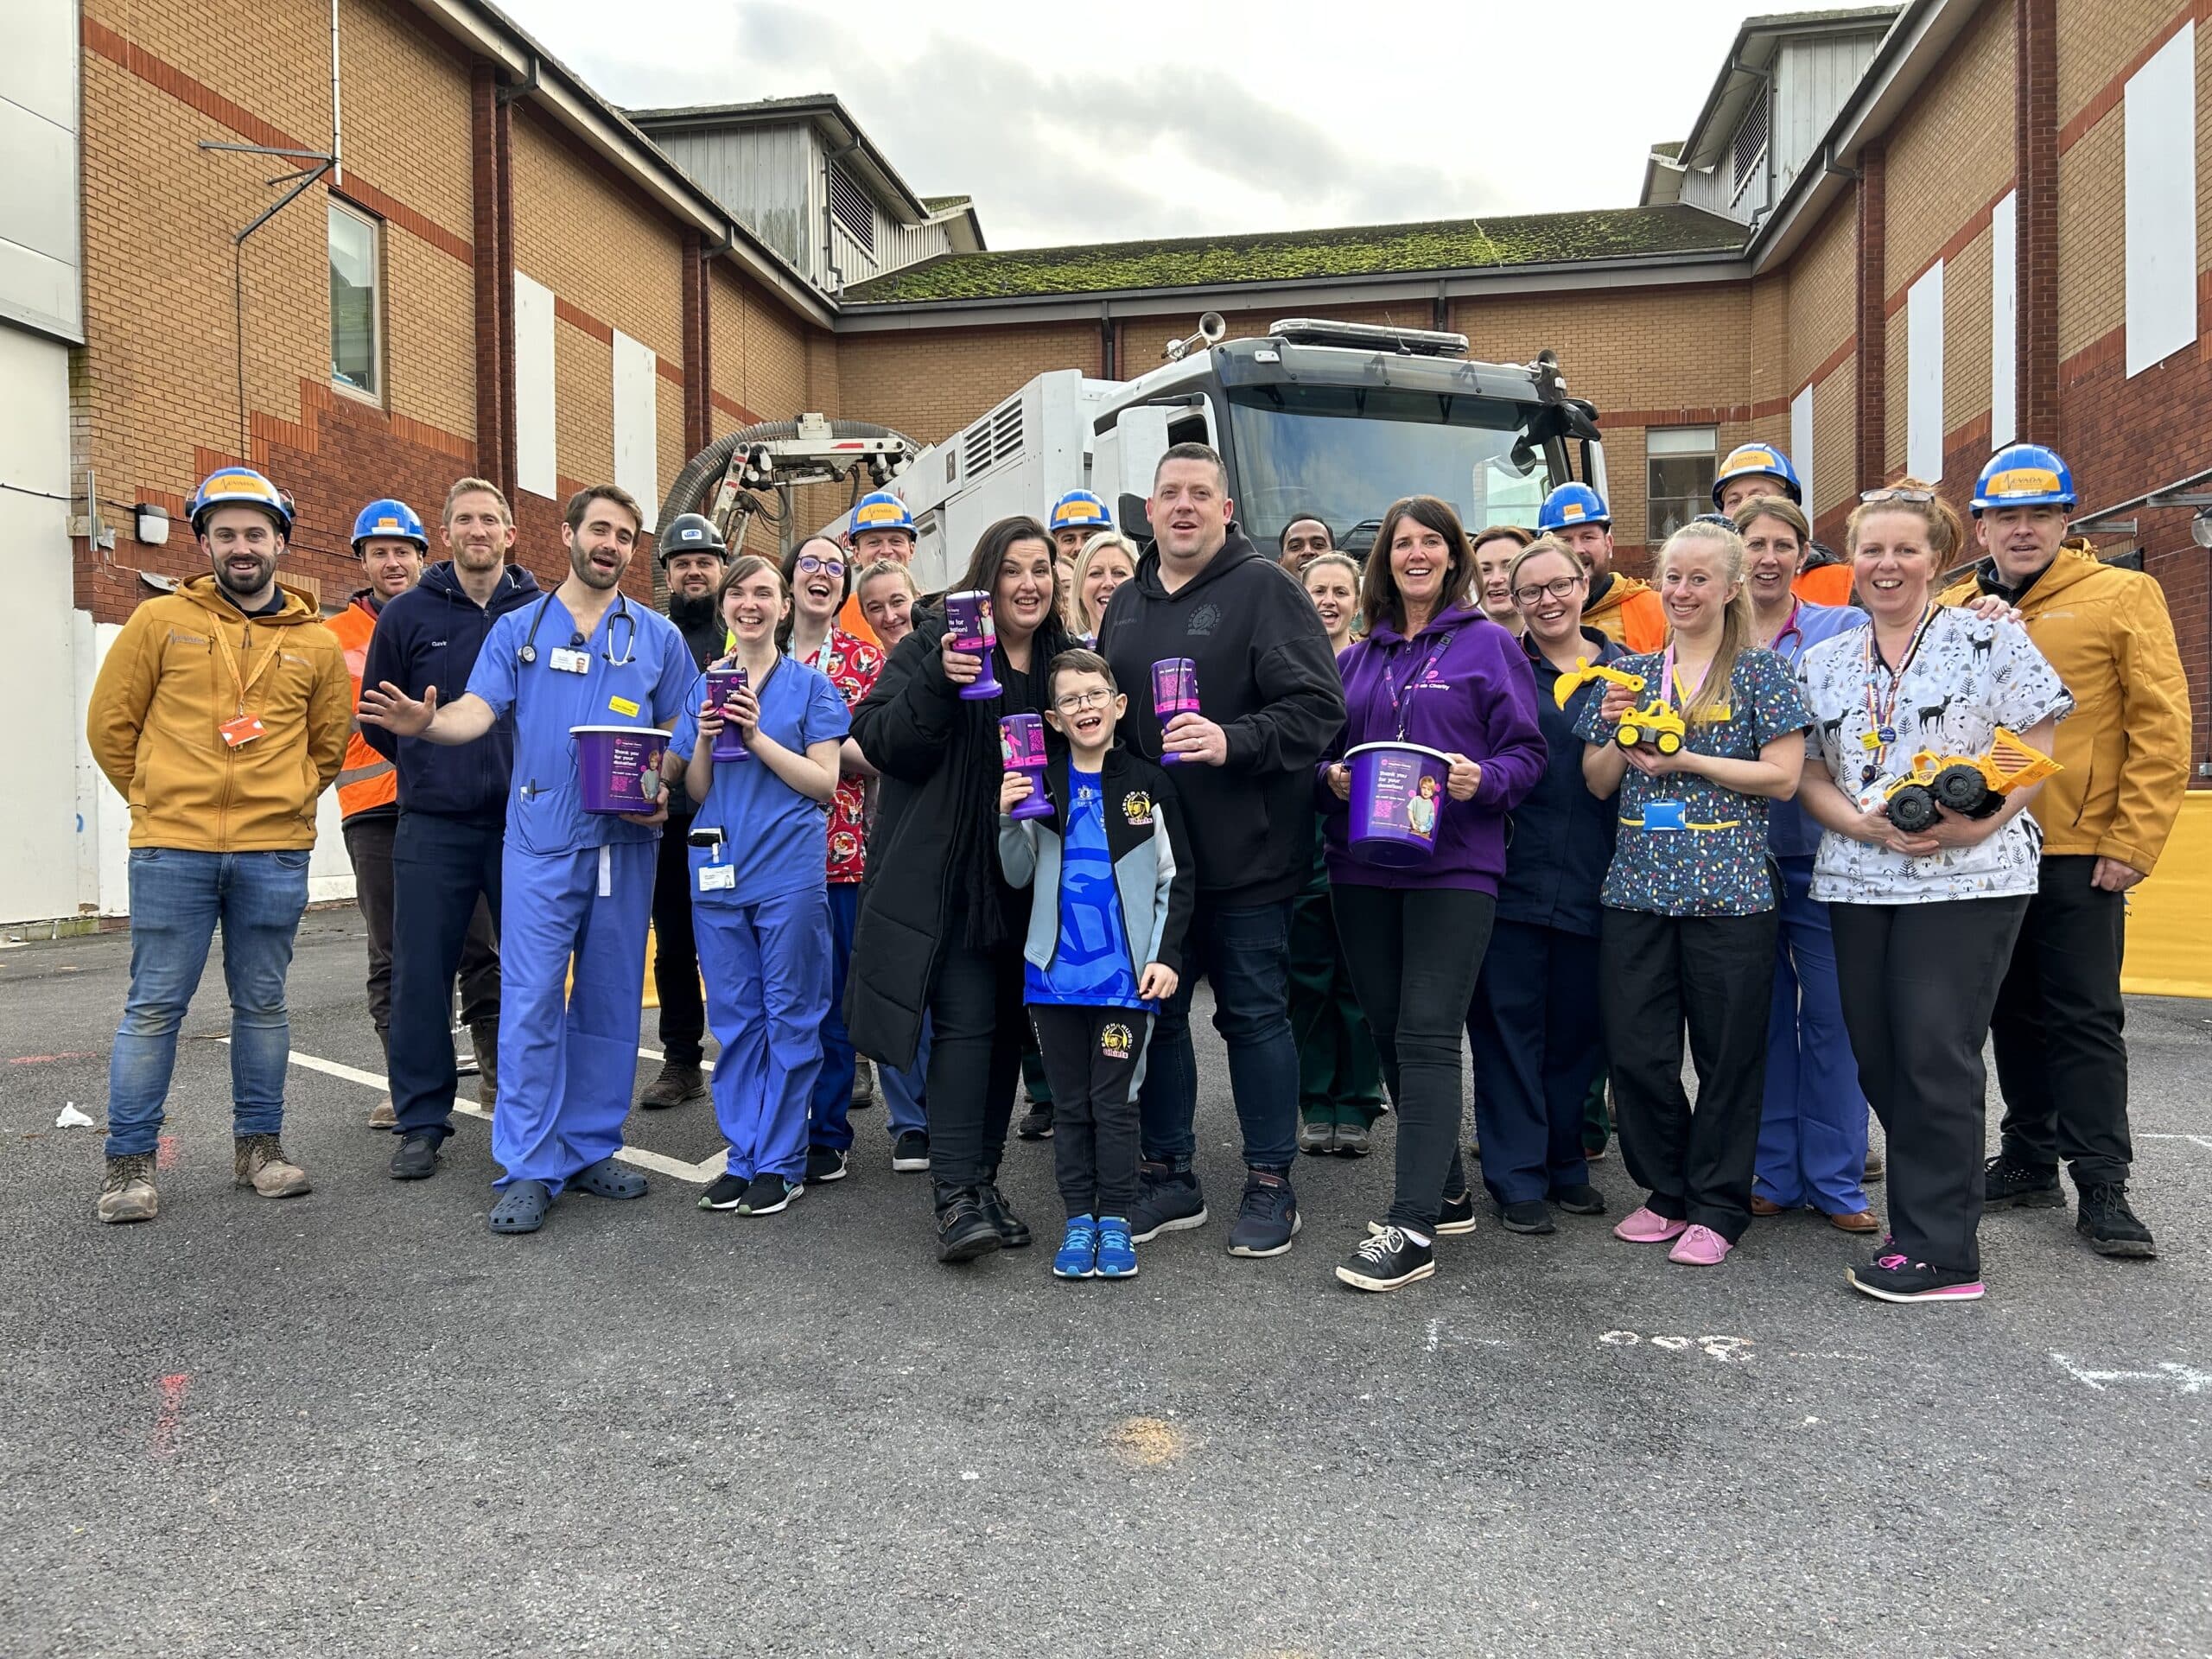 Tim Harvey, 10, from Cranbrook, helps launch the Royal Devon Hospitals Charity’s Children’s ED Appeal with parents Kristy and Ralph and members of the RD&E’s ED team. Picture: Royal Devon Hospitals Charity